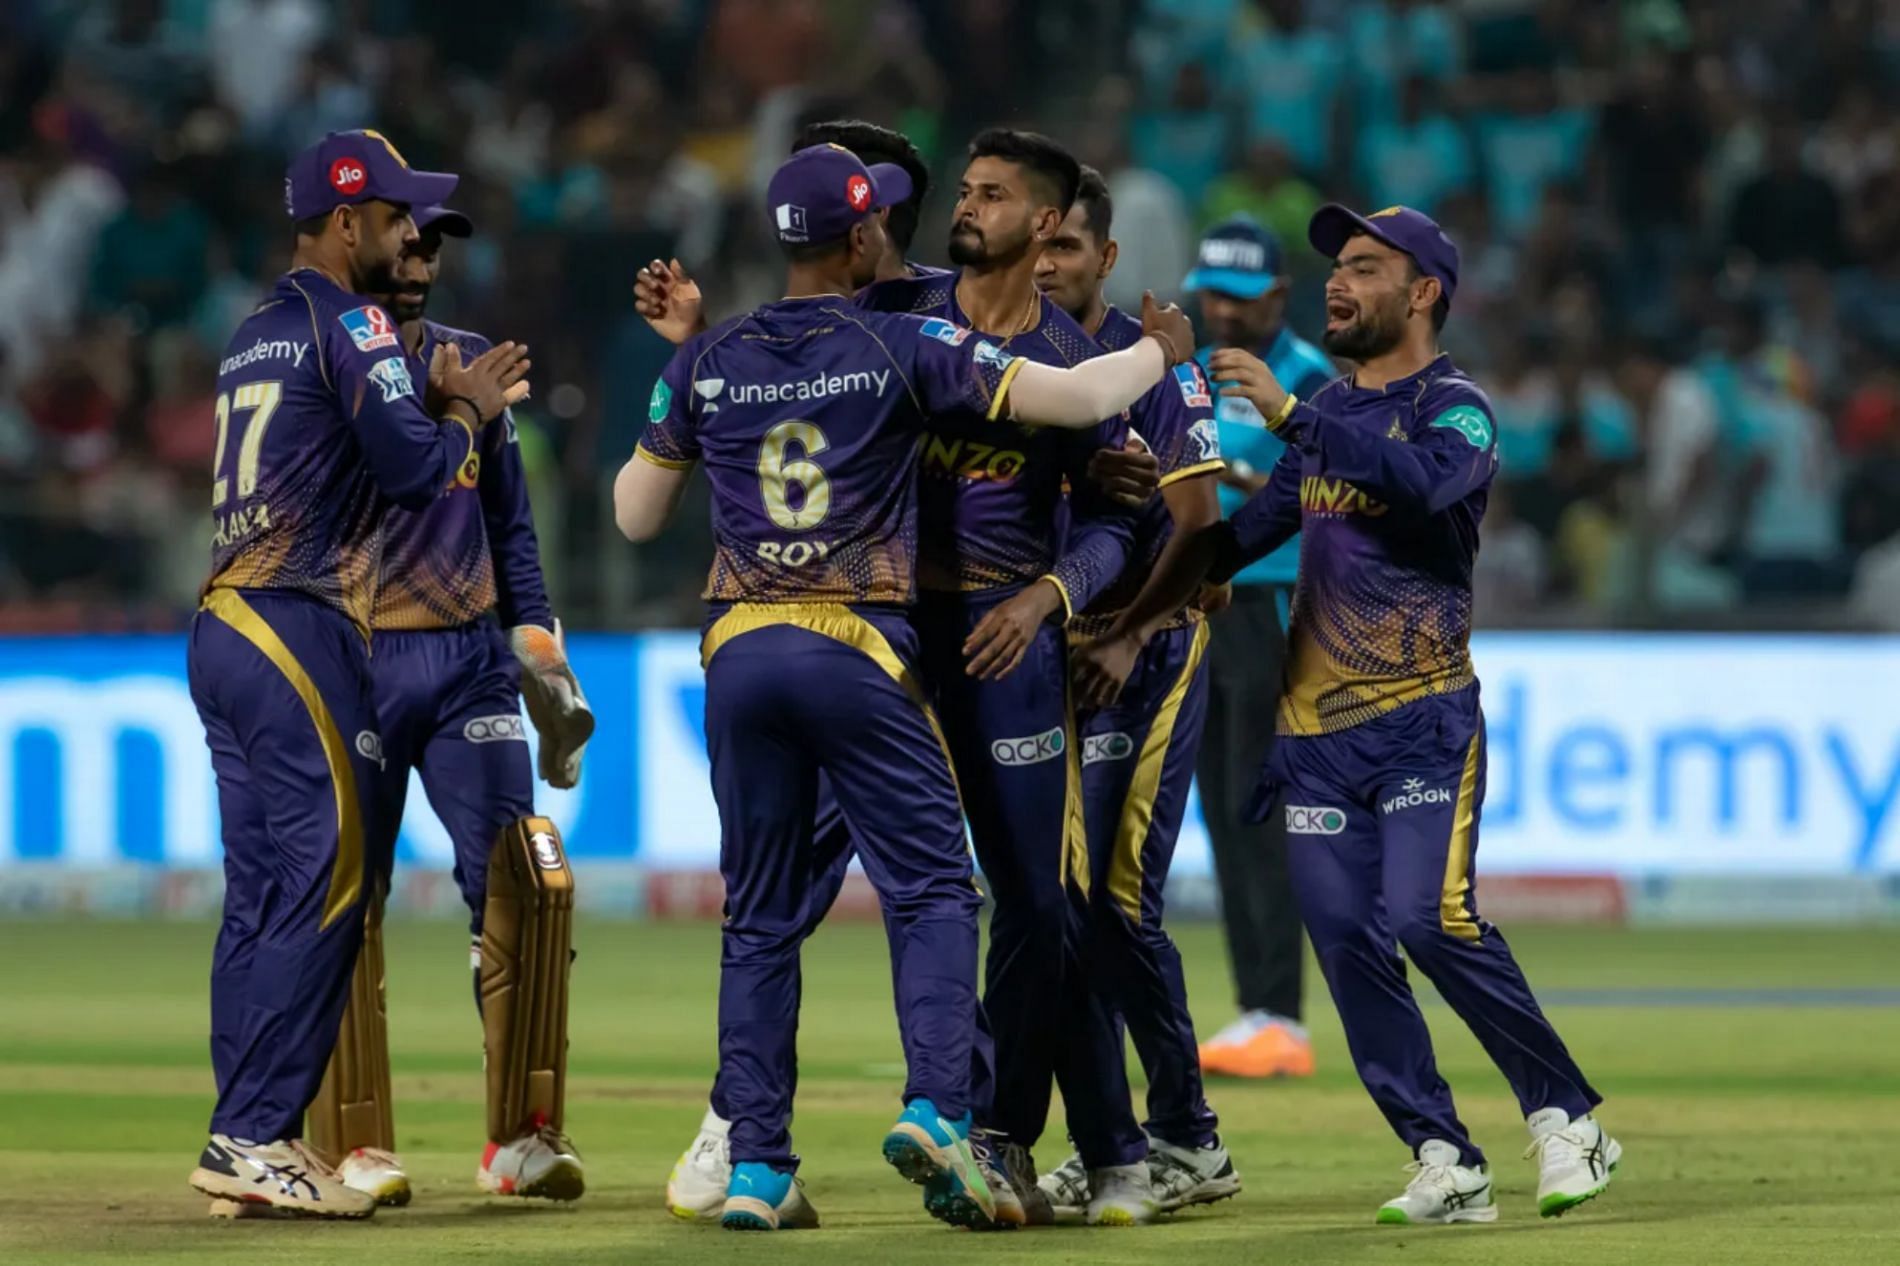 KKR players celebrate a wicket. Pic: IPLT20